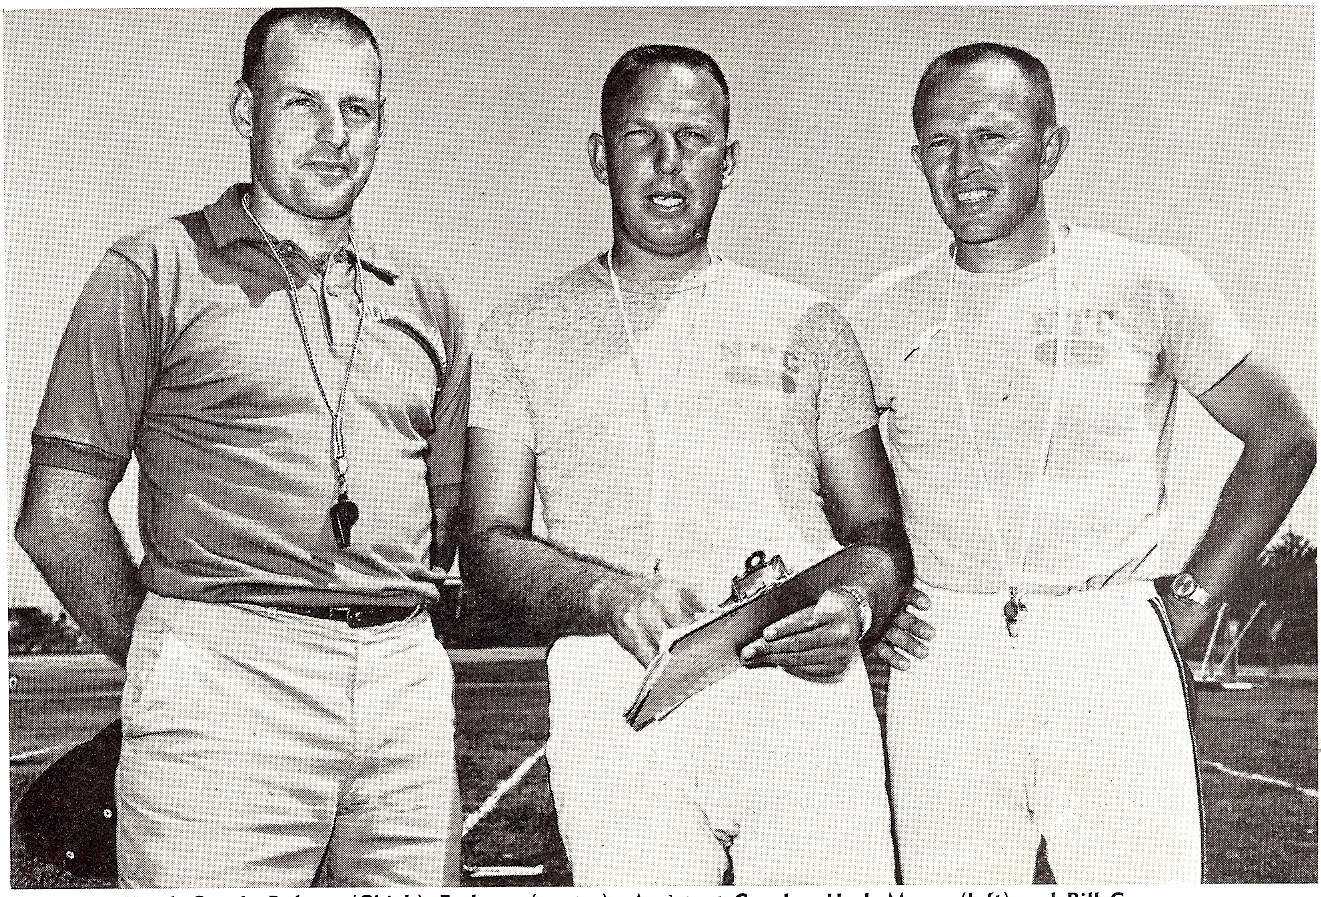 Embrey (center) was flanked by assistants Herb Meyer of Oceanside and Bill Green of Escondido during County squad preparations for the 1964 Breitbard College Prep All-Star game.